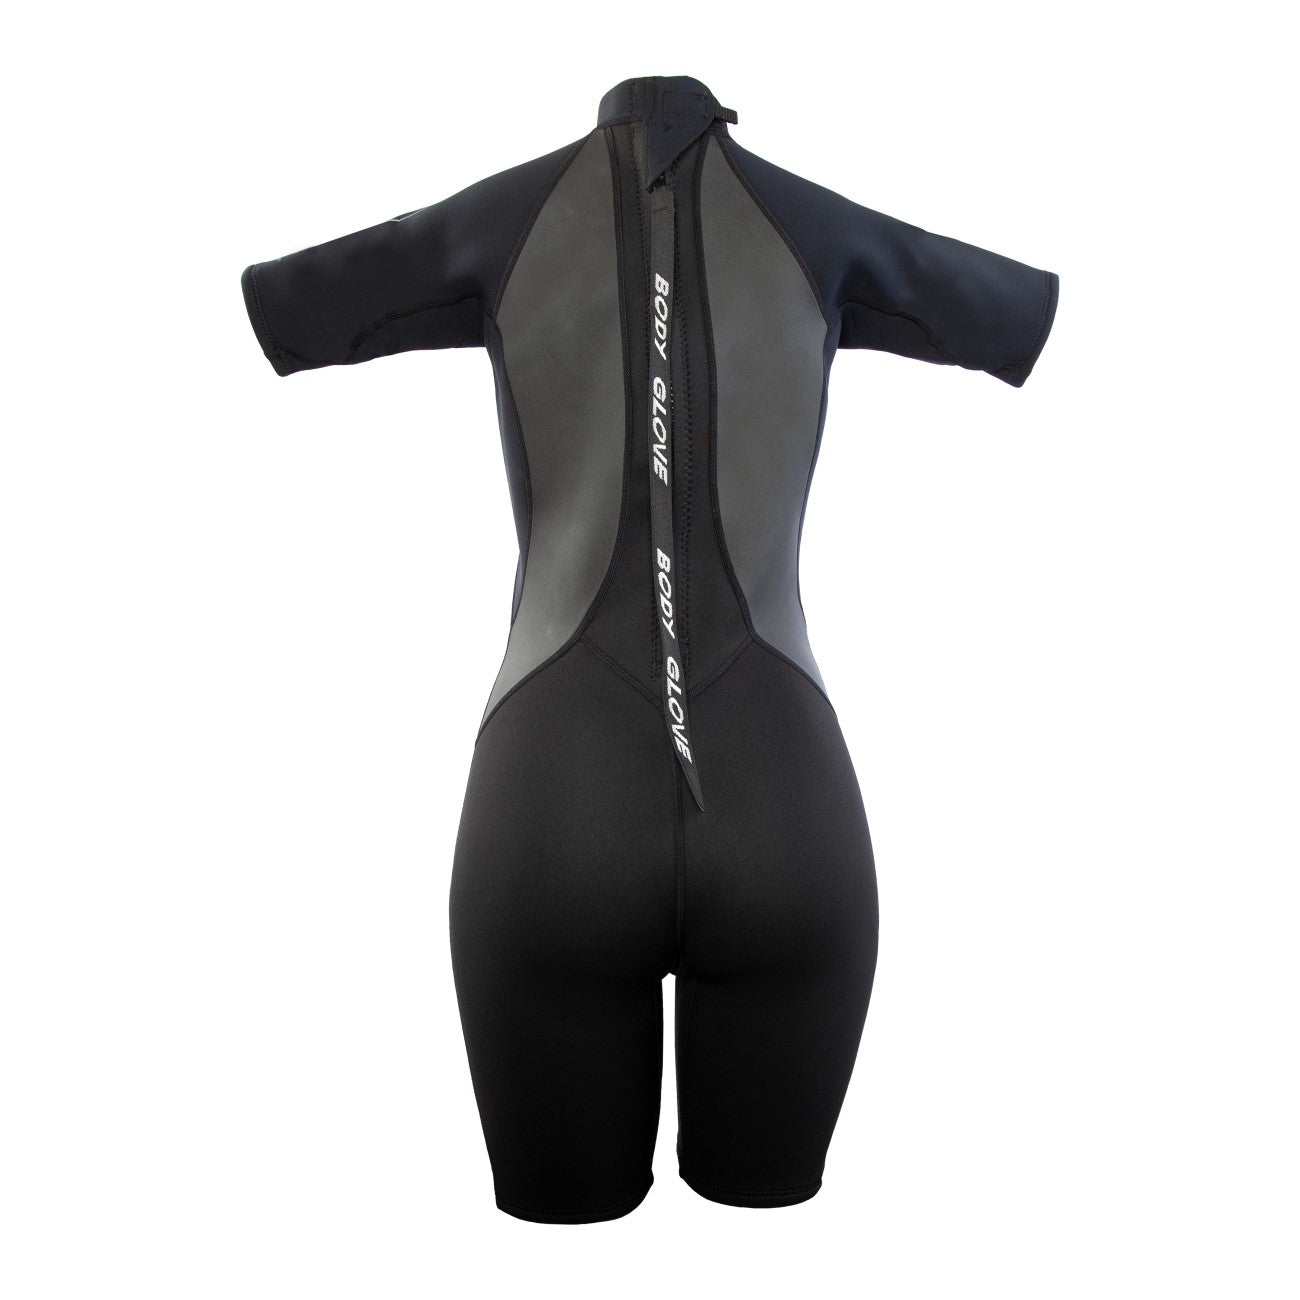 Body Glove Pro3 Women Shorty Spring Wetsuit 2/1mm - Back Zip - Quadra Flex  4 Way Stretch - Thermal Lightweight Performance - for Surfing, Boogie